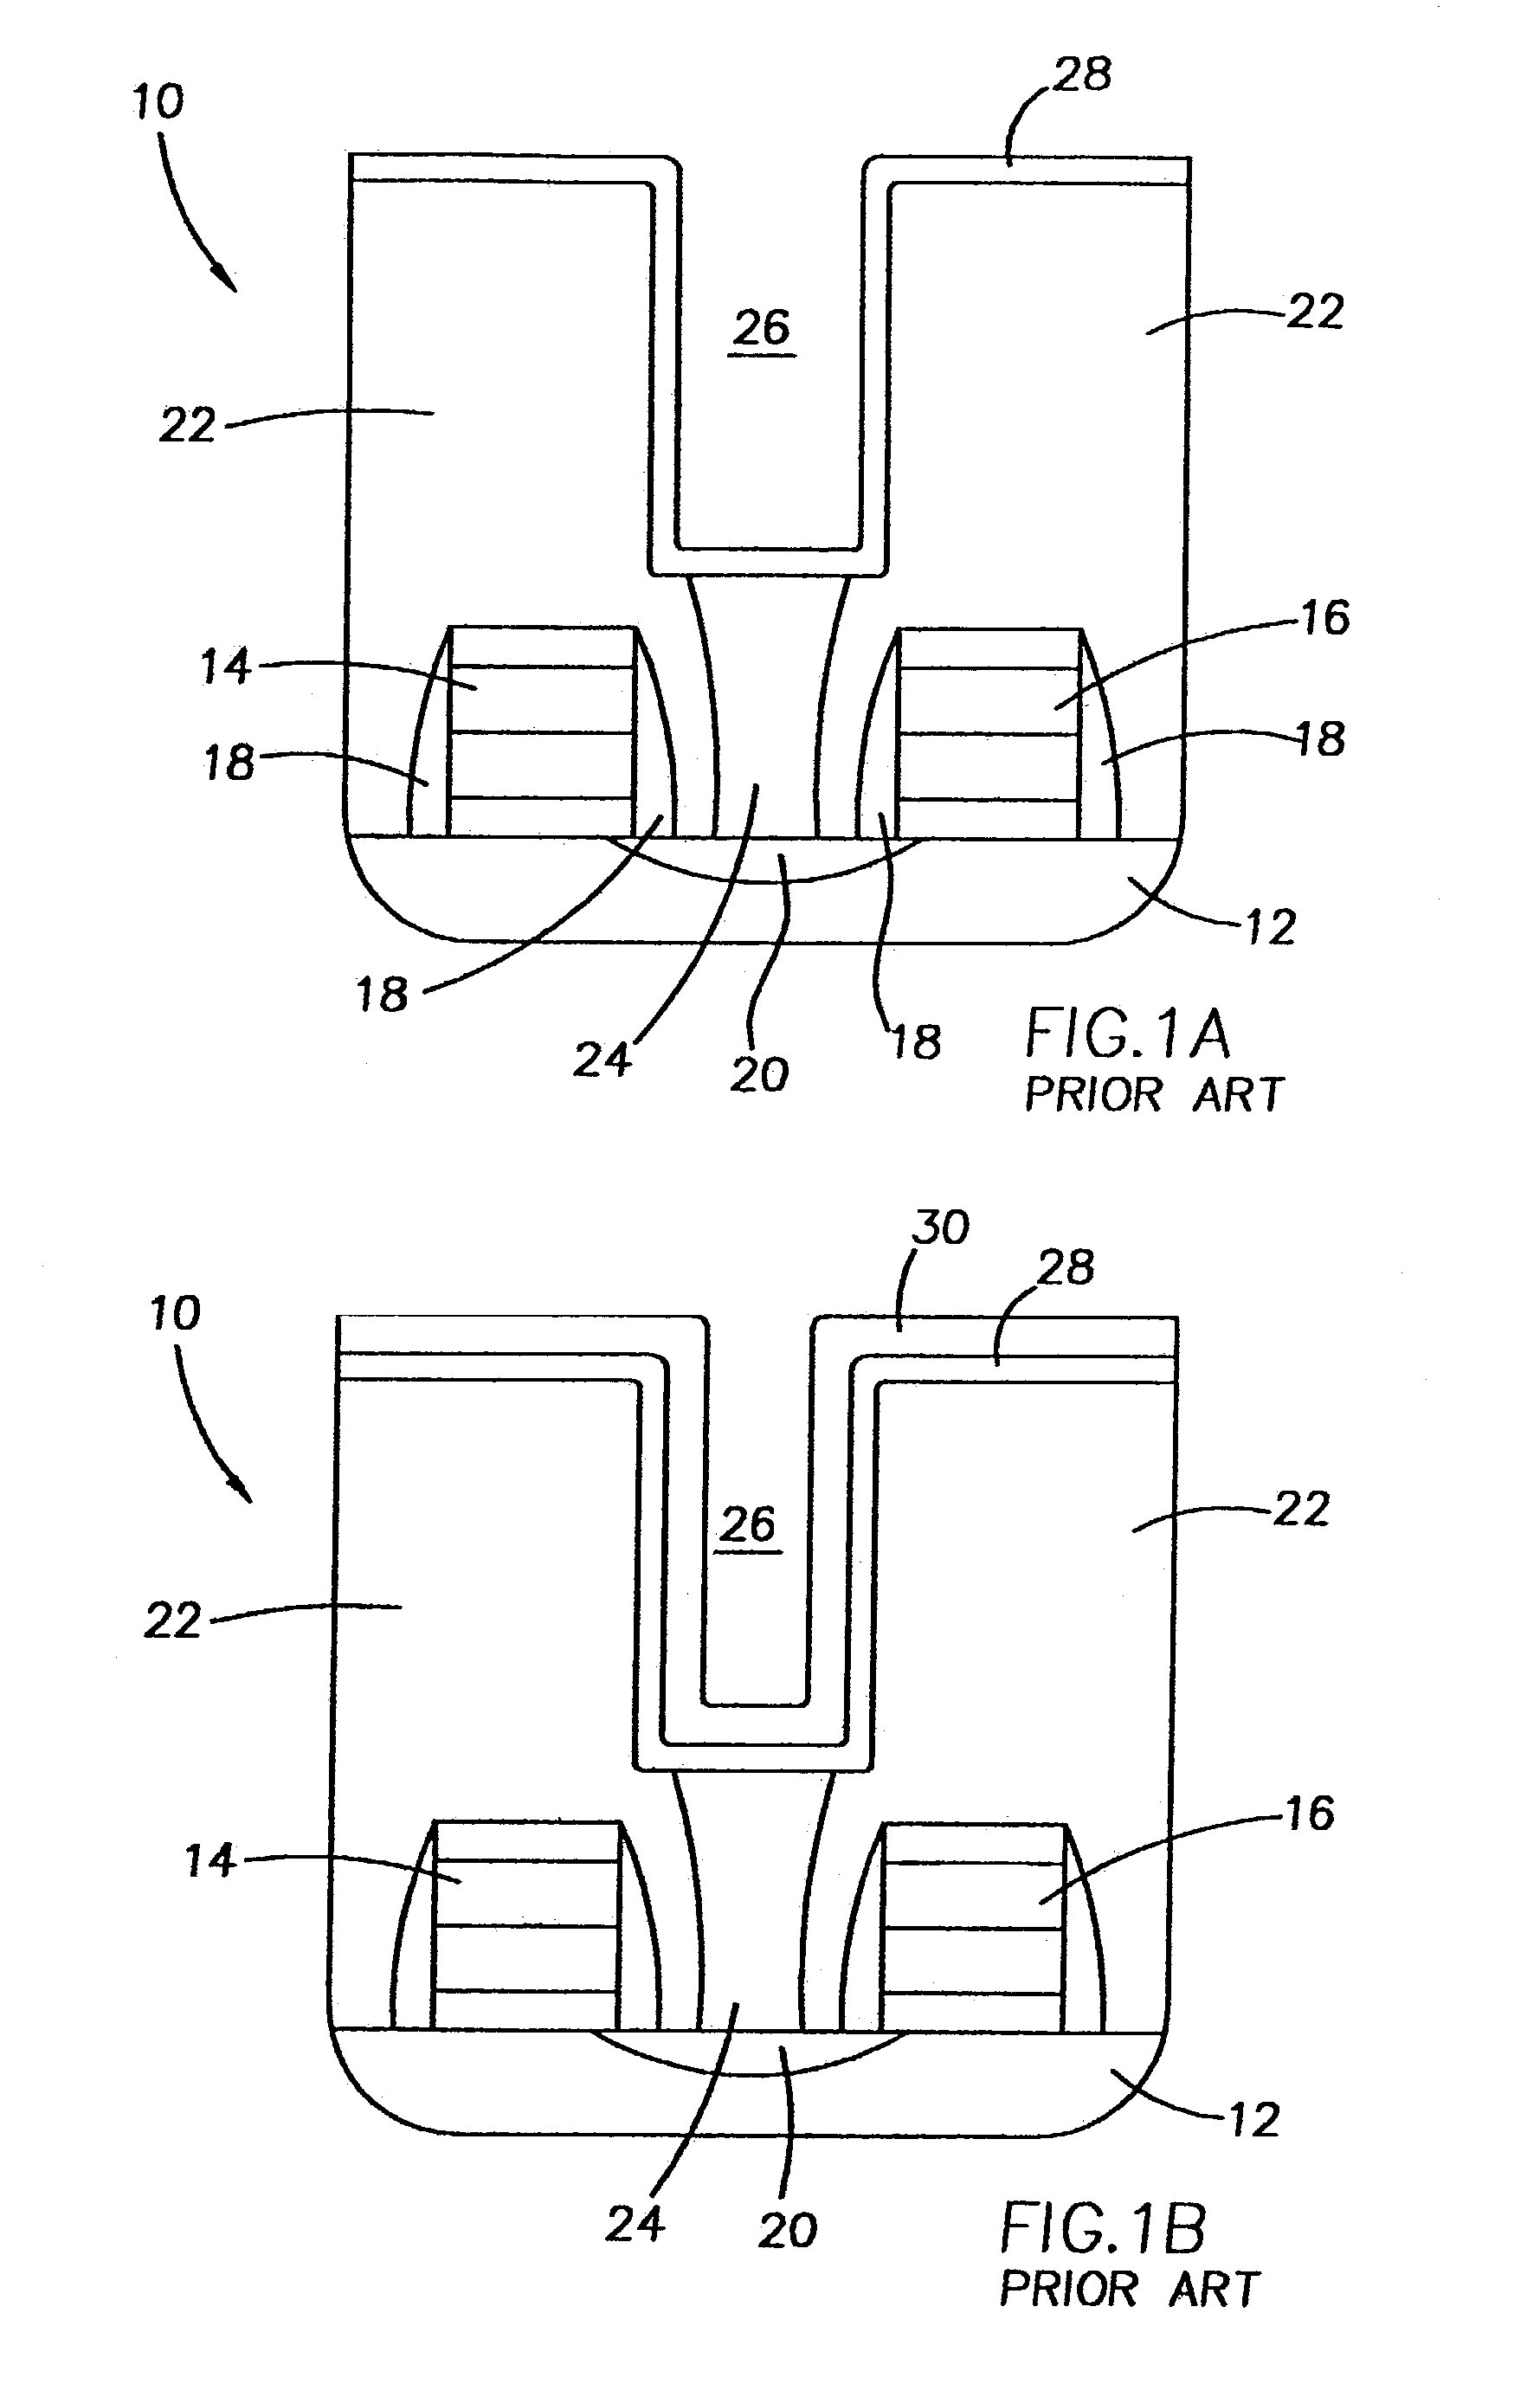 Method for enhancing electrode surface area in DRAM cell capacitors